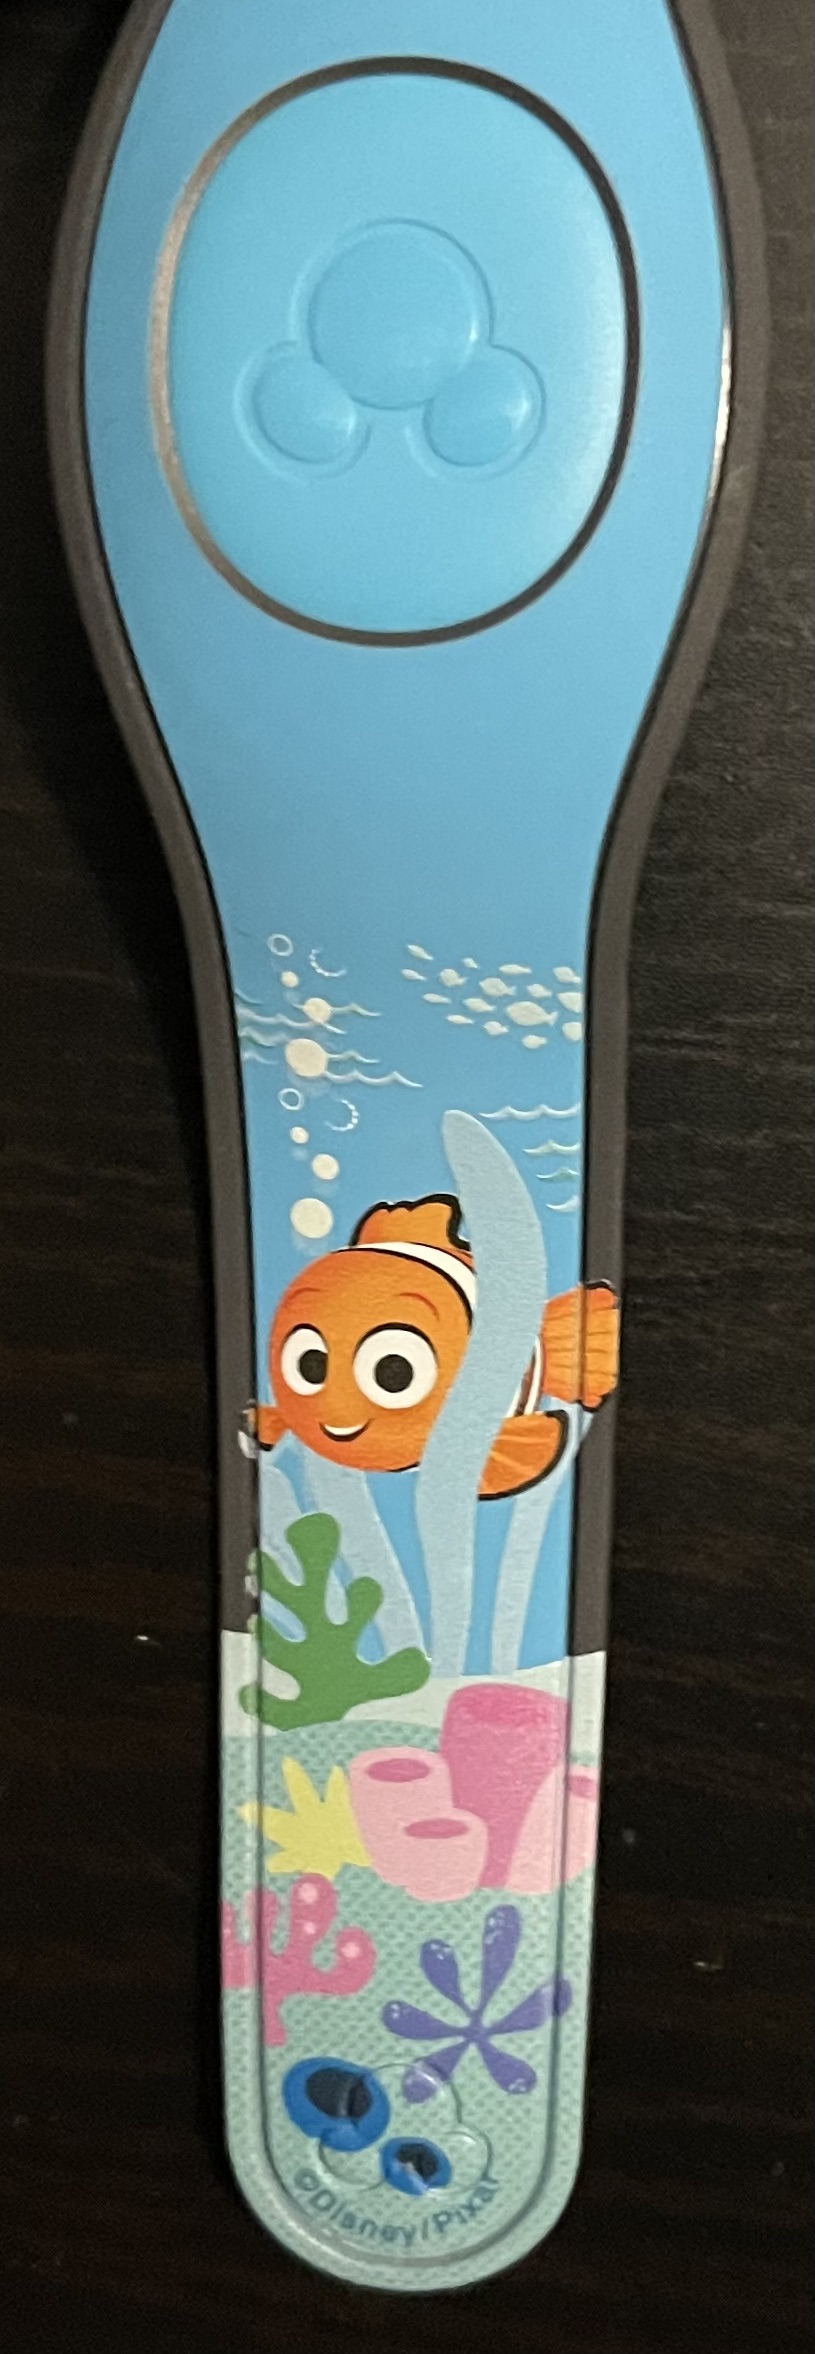 A new Nemo Open Edition MagicBand was released today